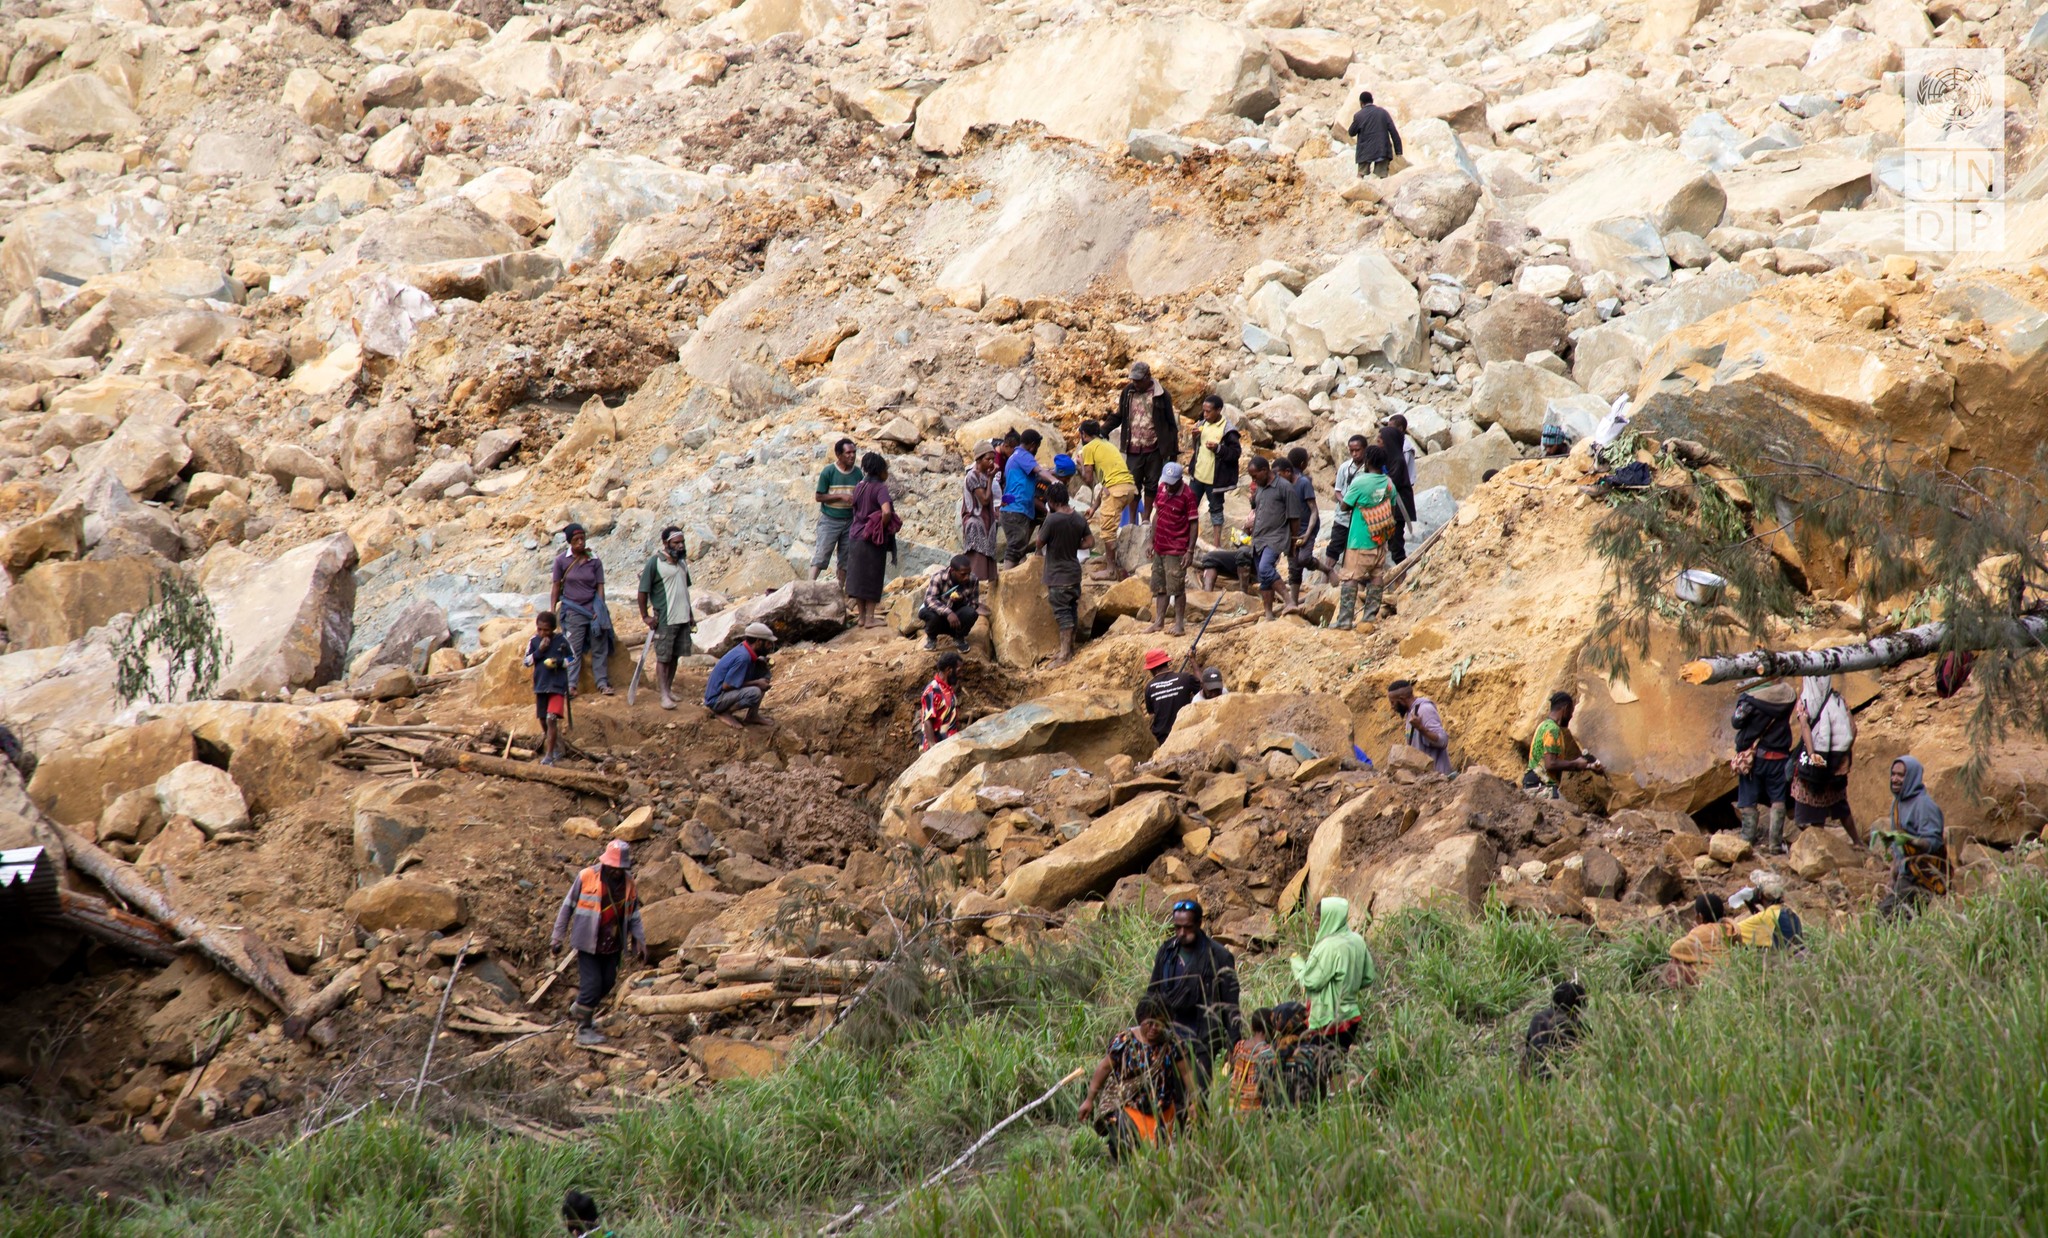 A group of people working in a rocky terrain with large boulders and some grassy areas in the foreground. "UNDP" logo in the top right corner.